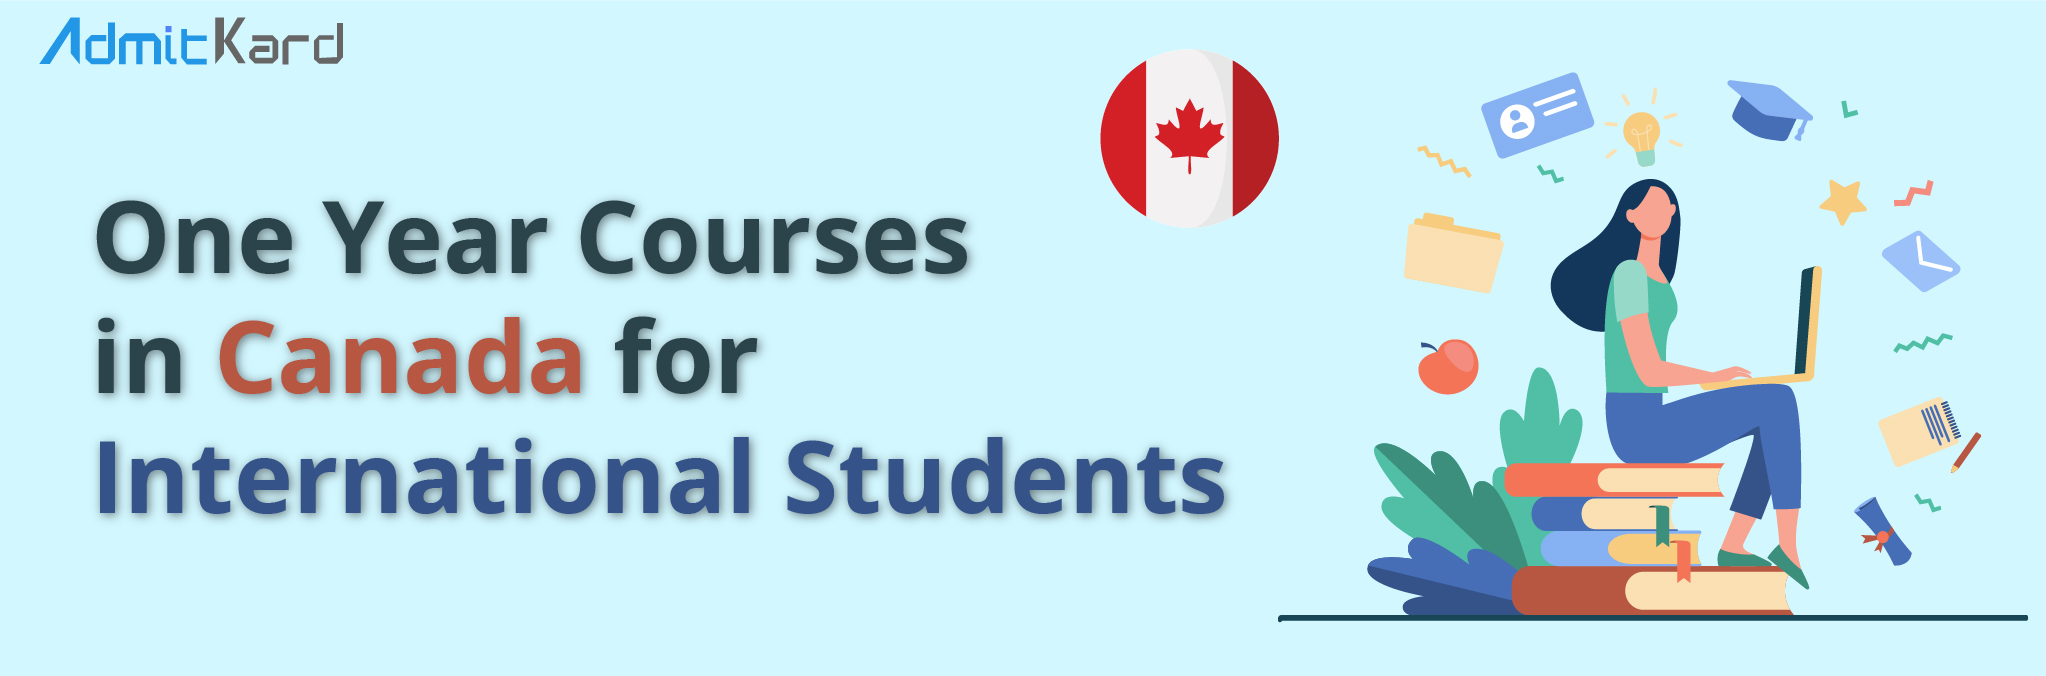 1 yr courses in canada for international students